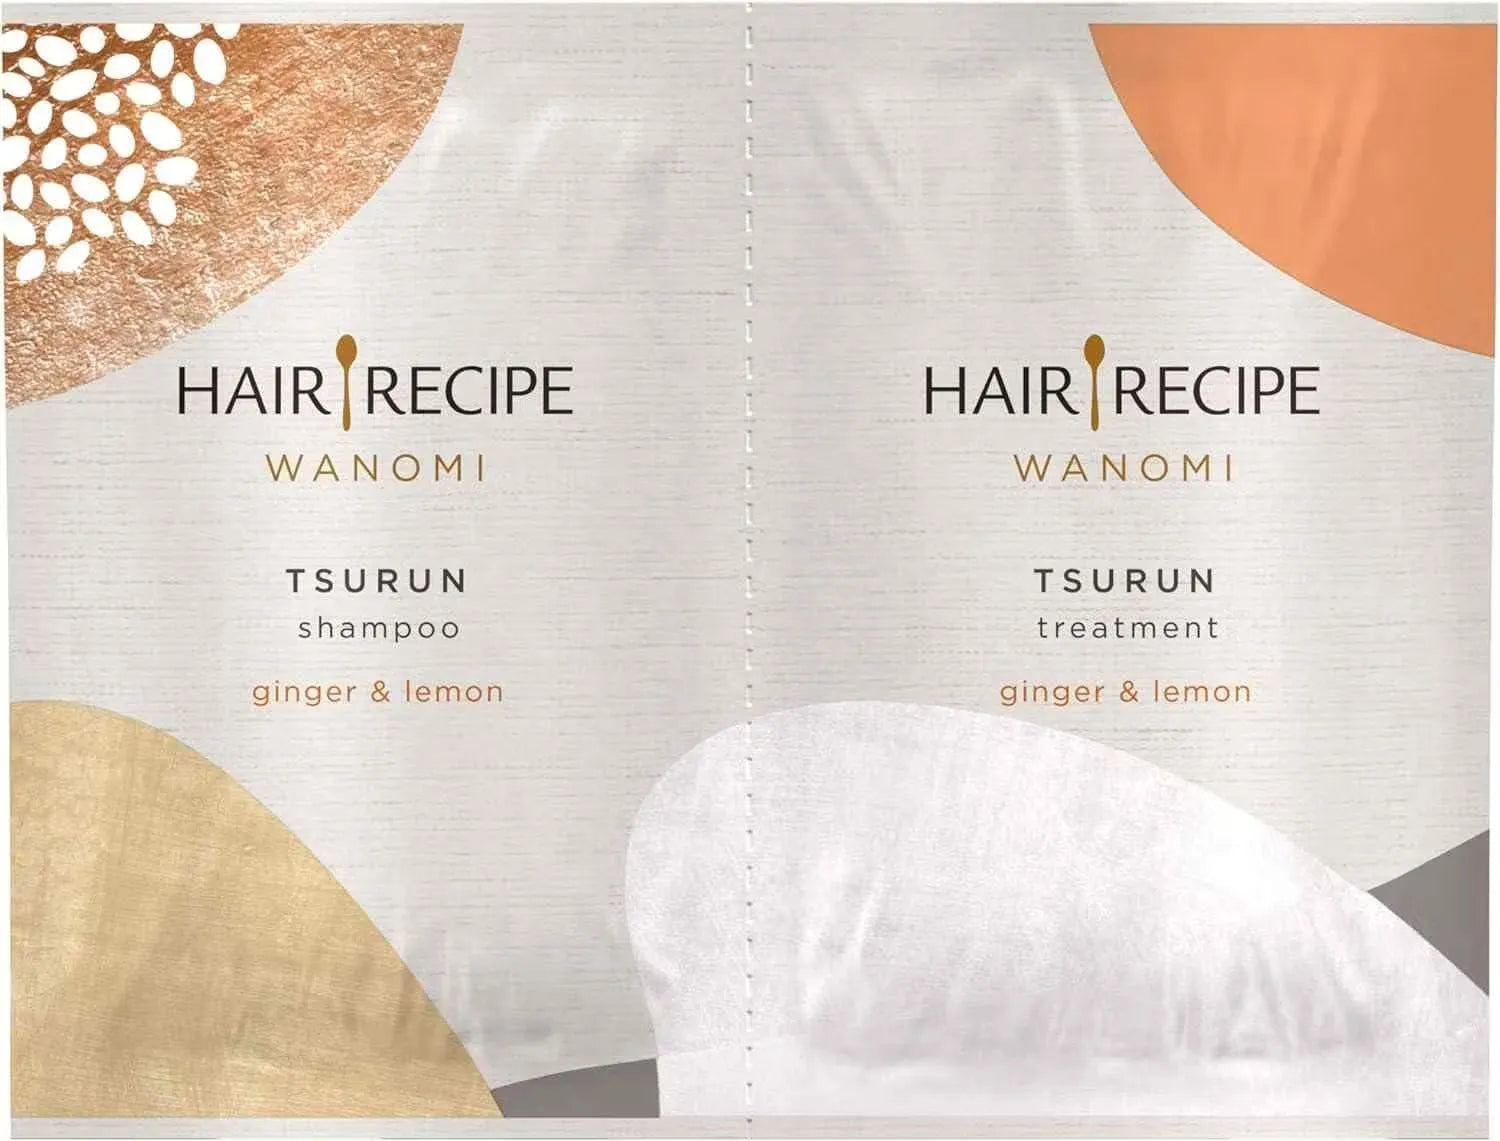 Two small travel-sized bottles (10ml each) of Hair Recipe Wanomi Tsurun shampoo and treatment, featuring ginger and lemon scent for damaged hair.